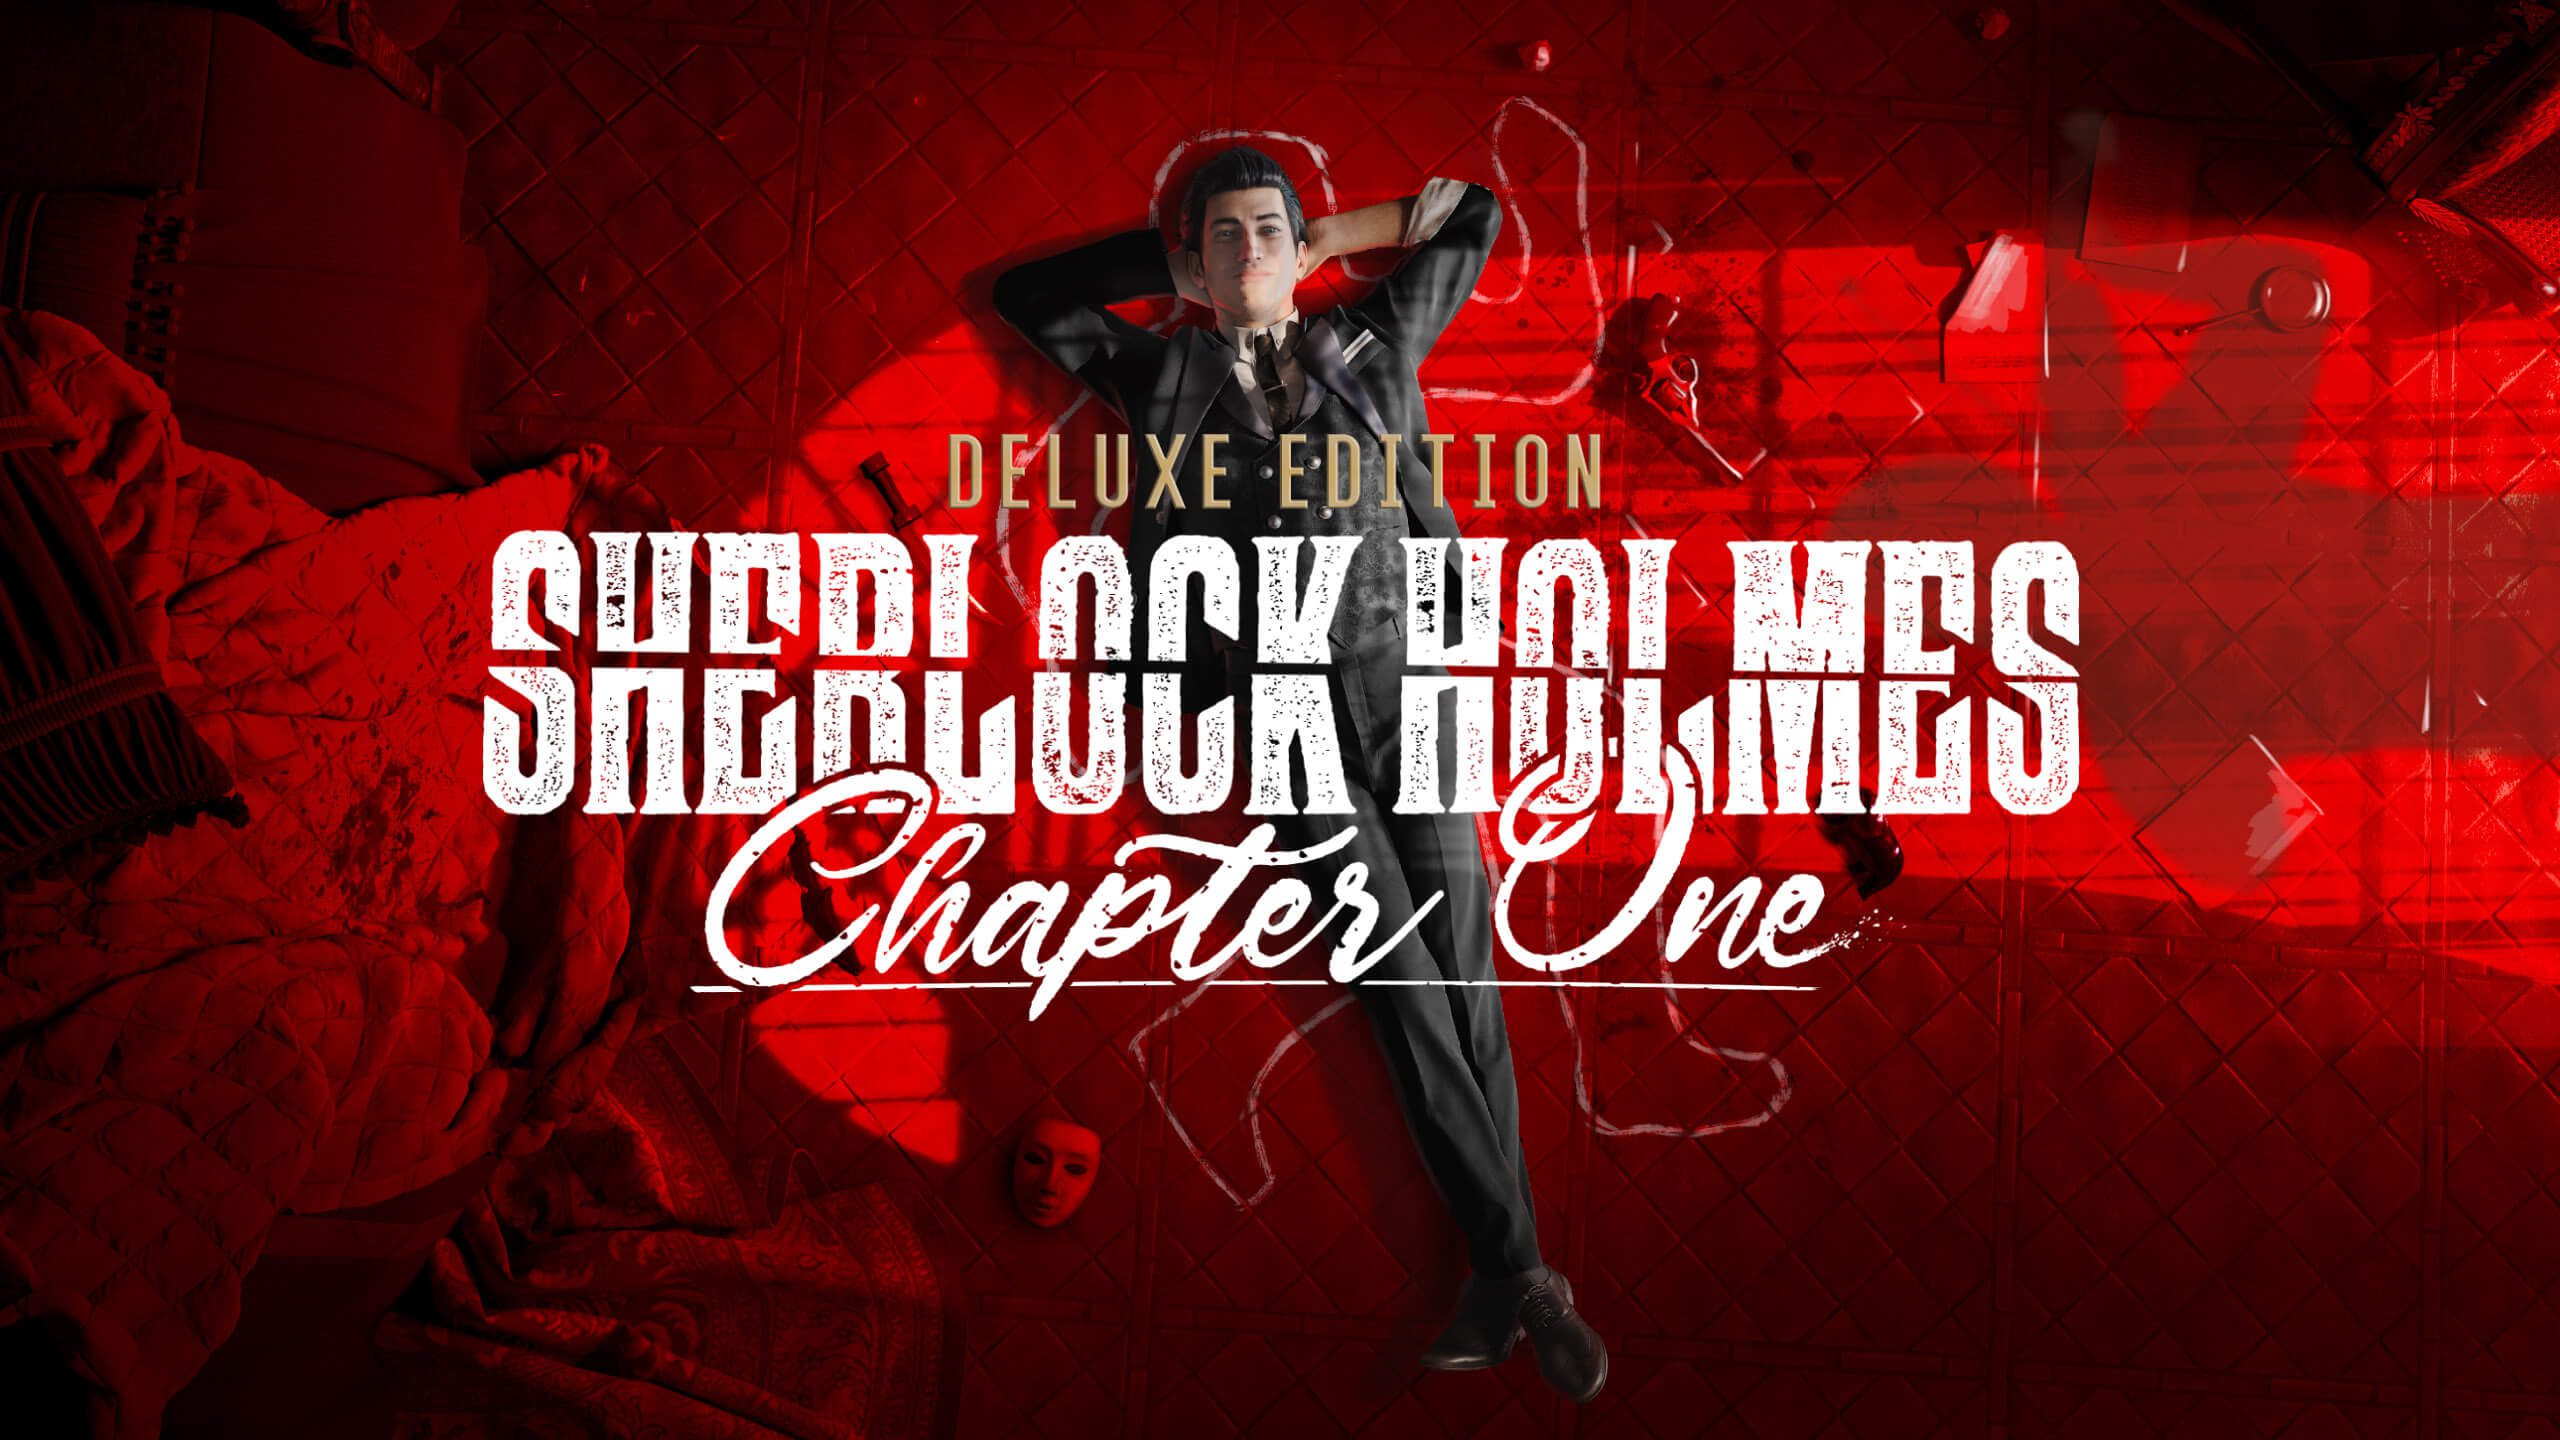 HD Sherlock Holmes: Chapter One Wallpapers